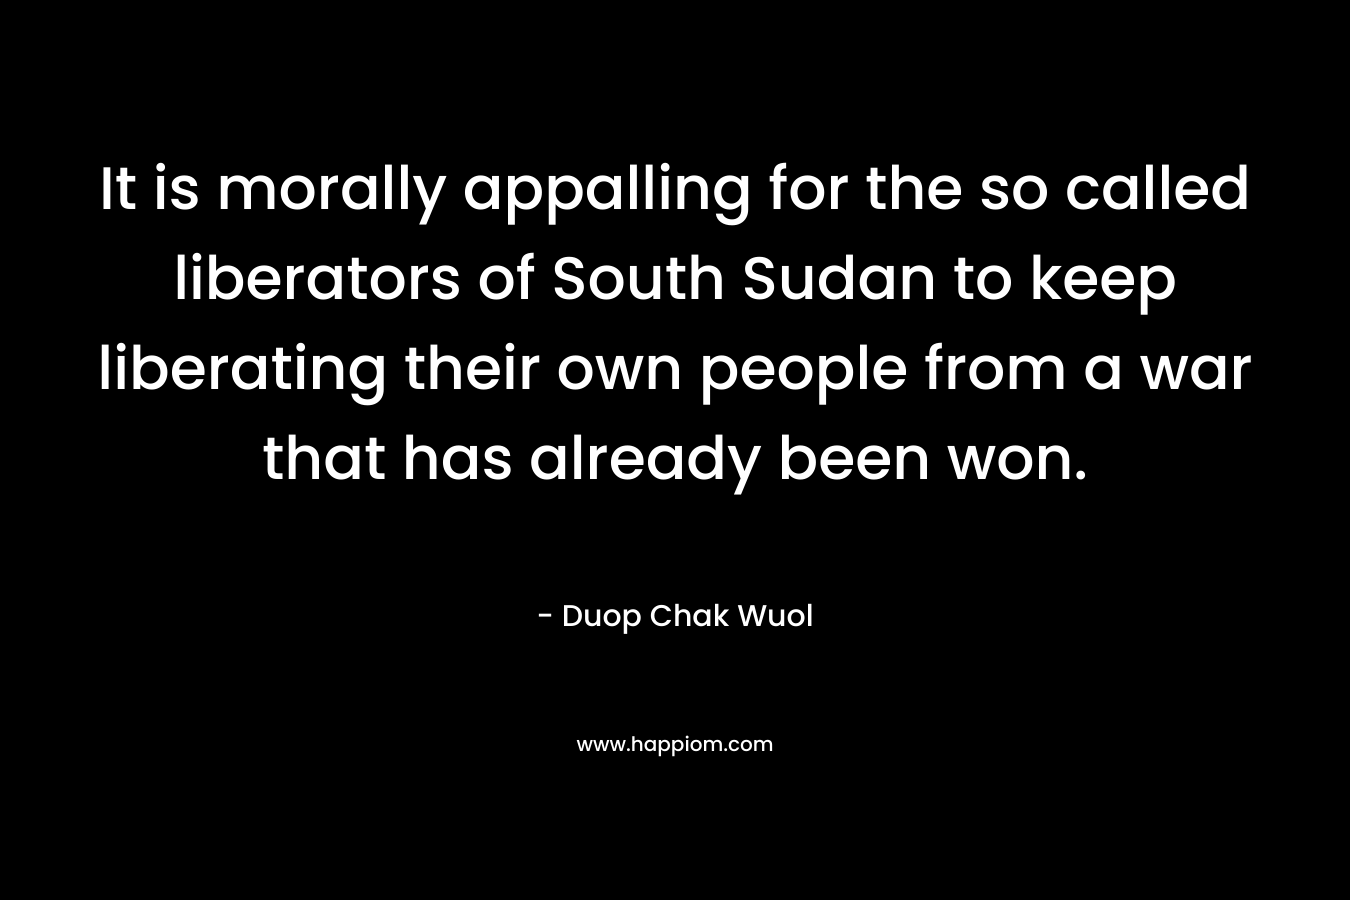 It is morally appalling for the so called liberators of South Sudan to keep liberating their own people from a war that has already been won. – Duop Chak Wuol